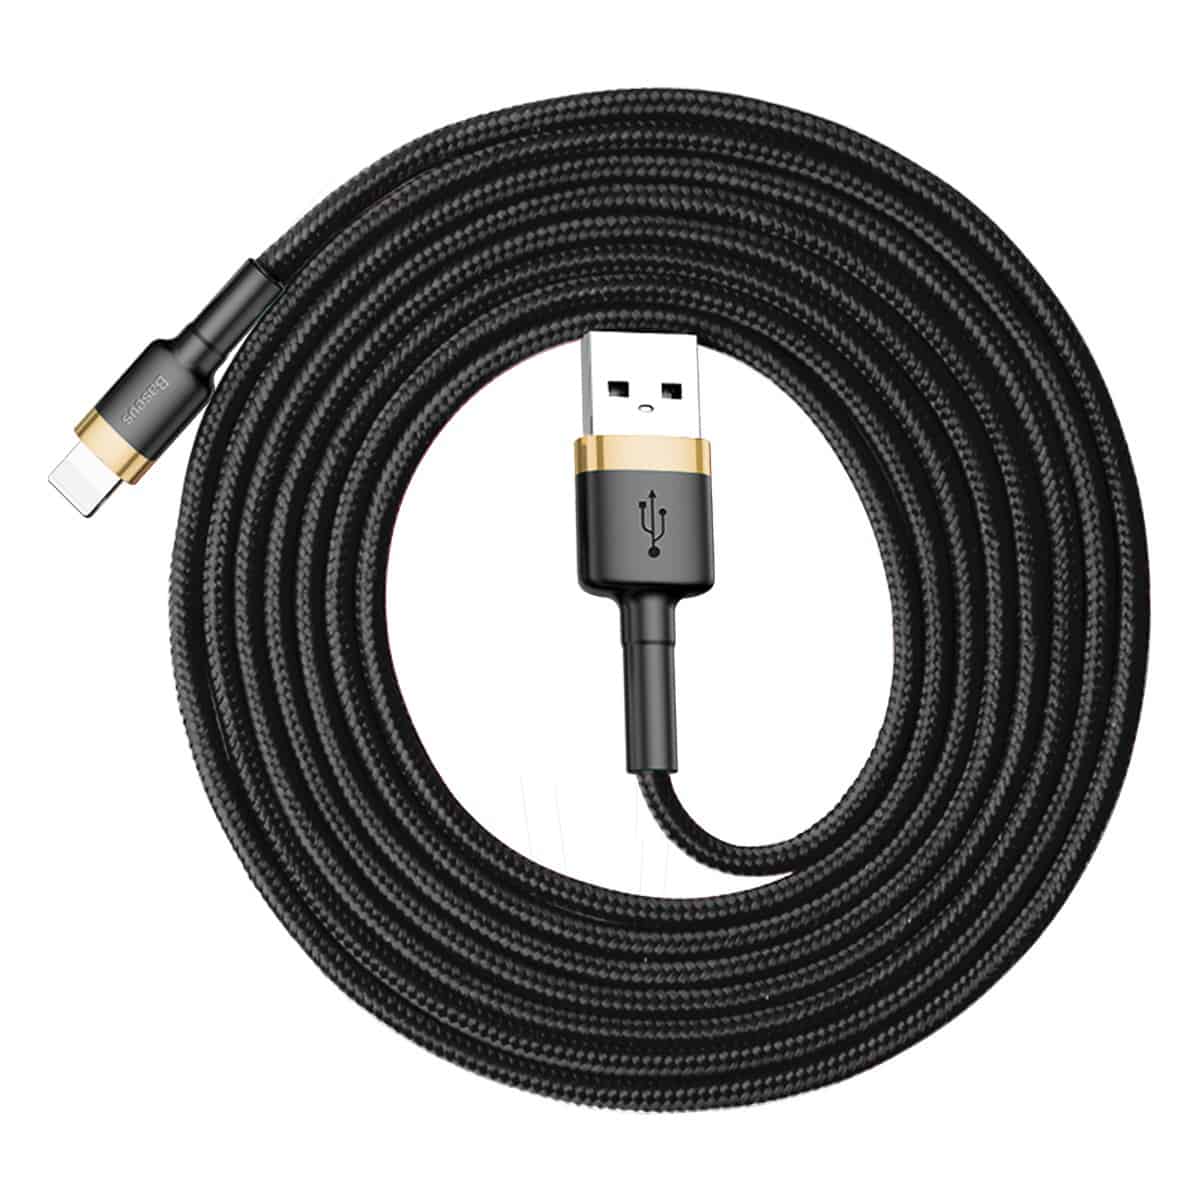 Baseus cafule Cable USB For iPhone 2.4A 1m/1.5A 2m Gold+Black